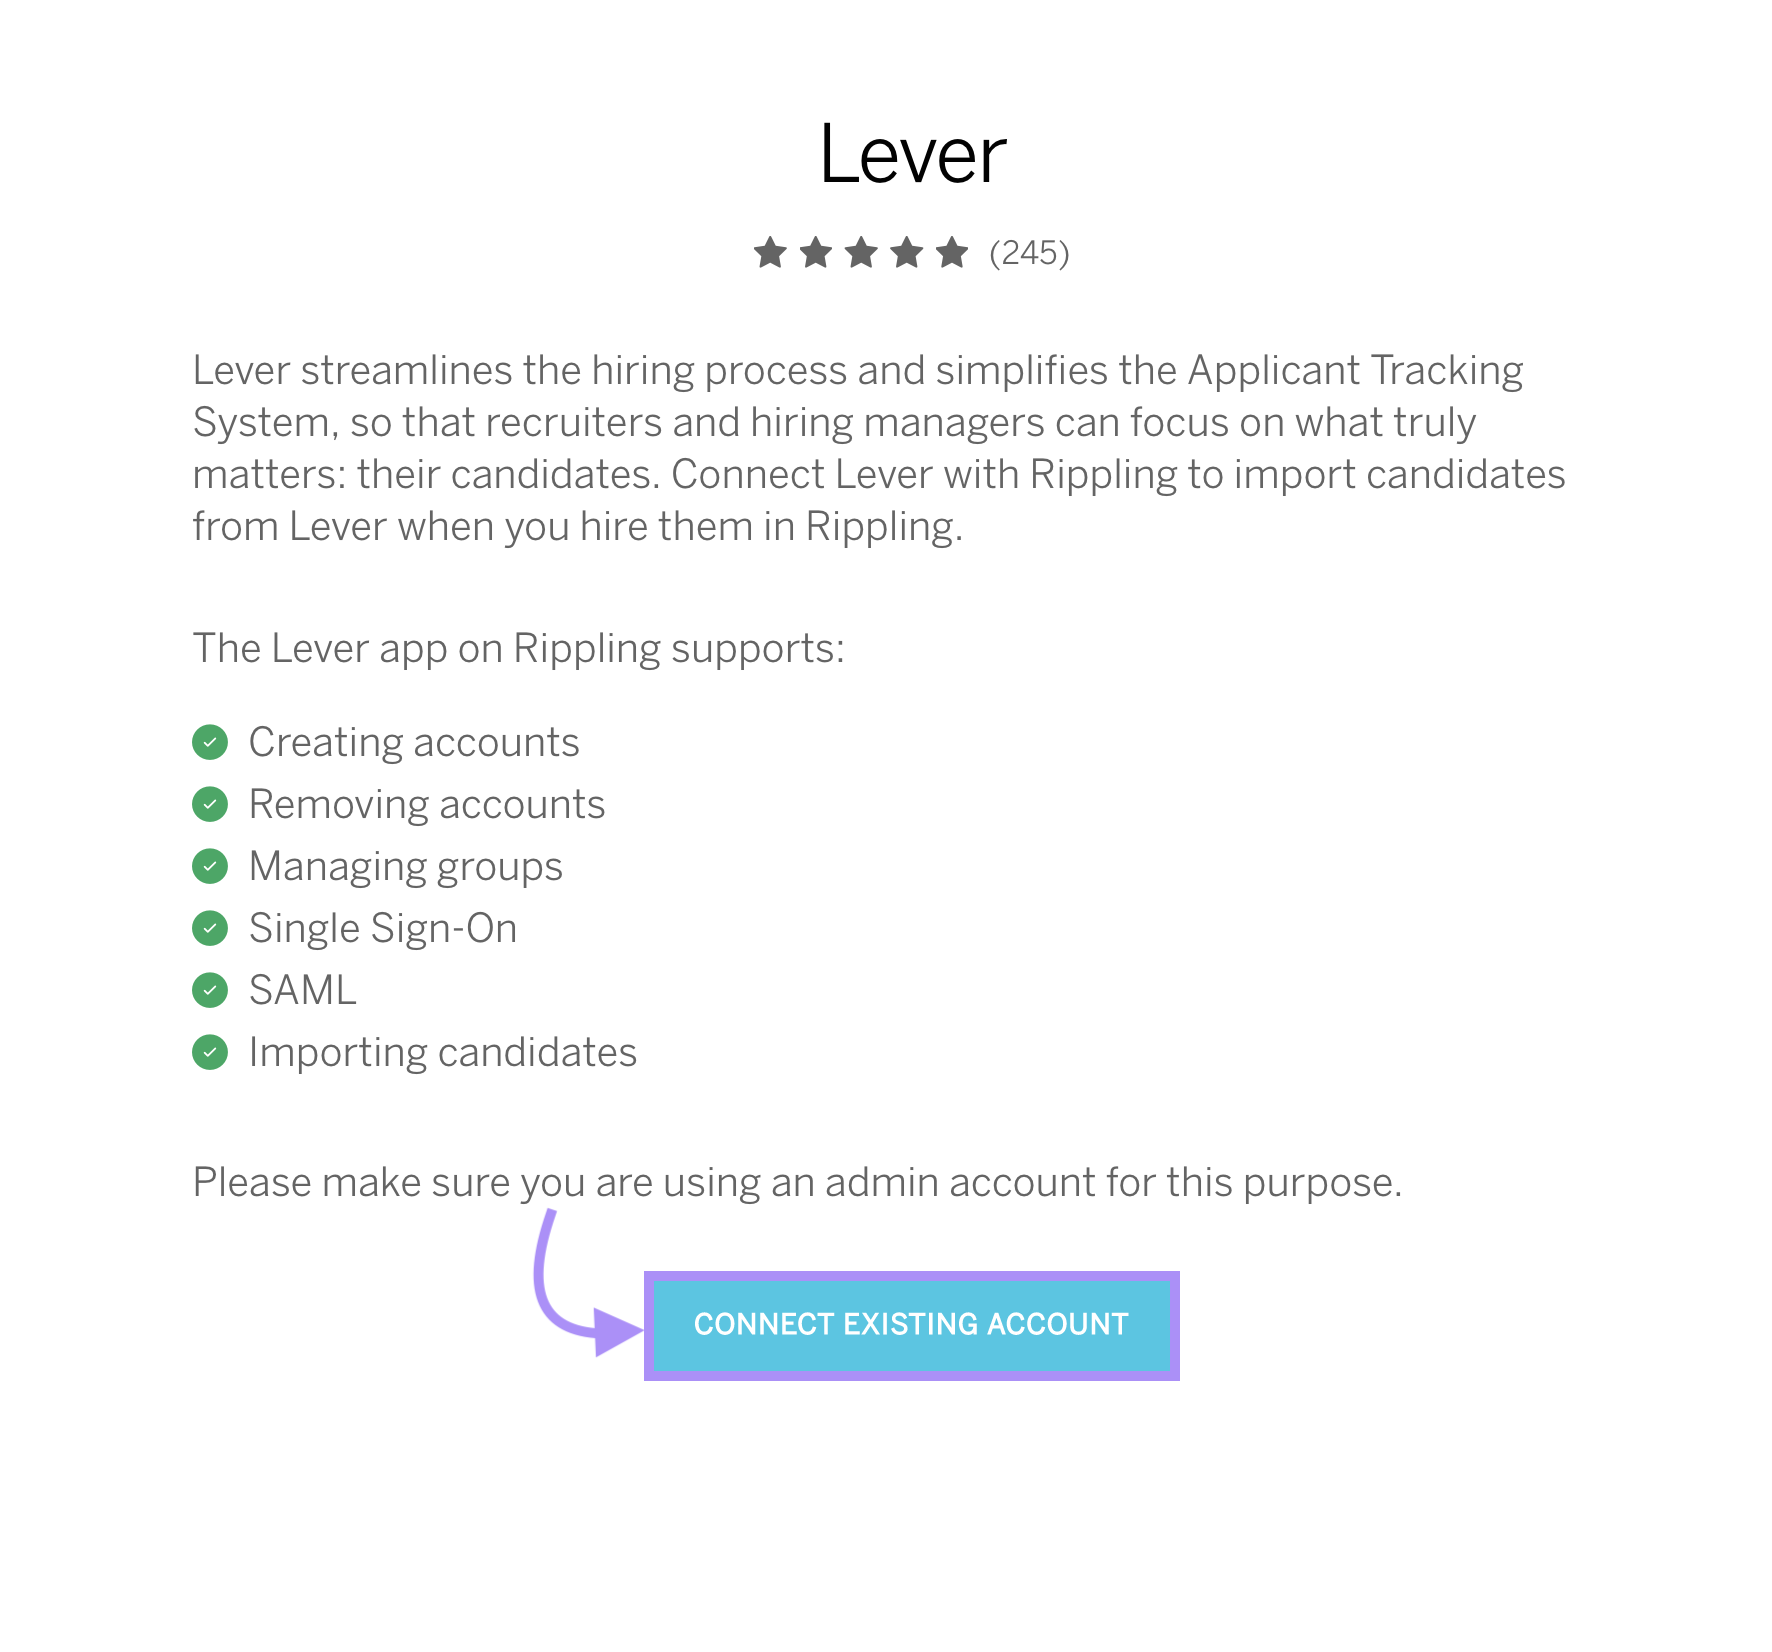 Lever-Rippling-1.png